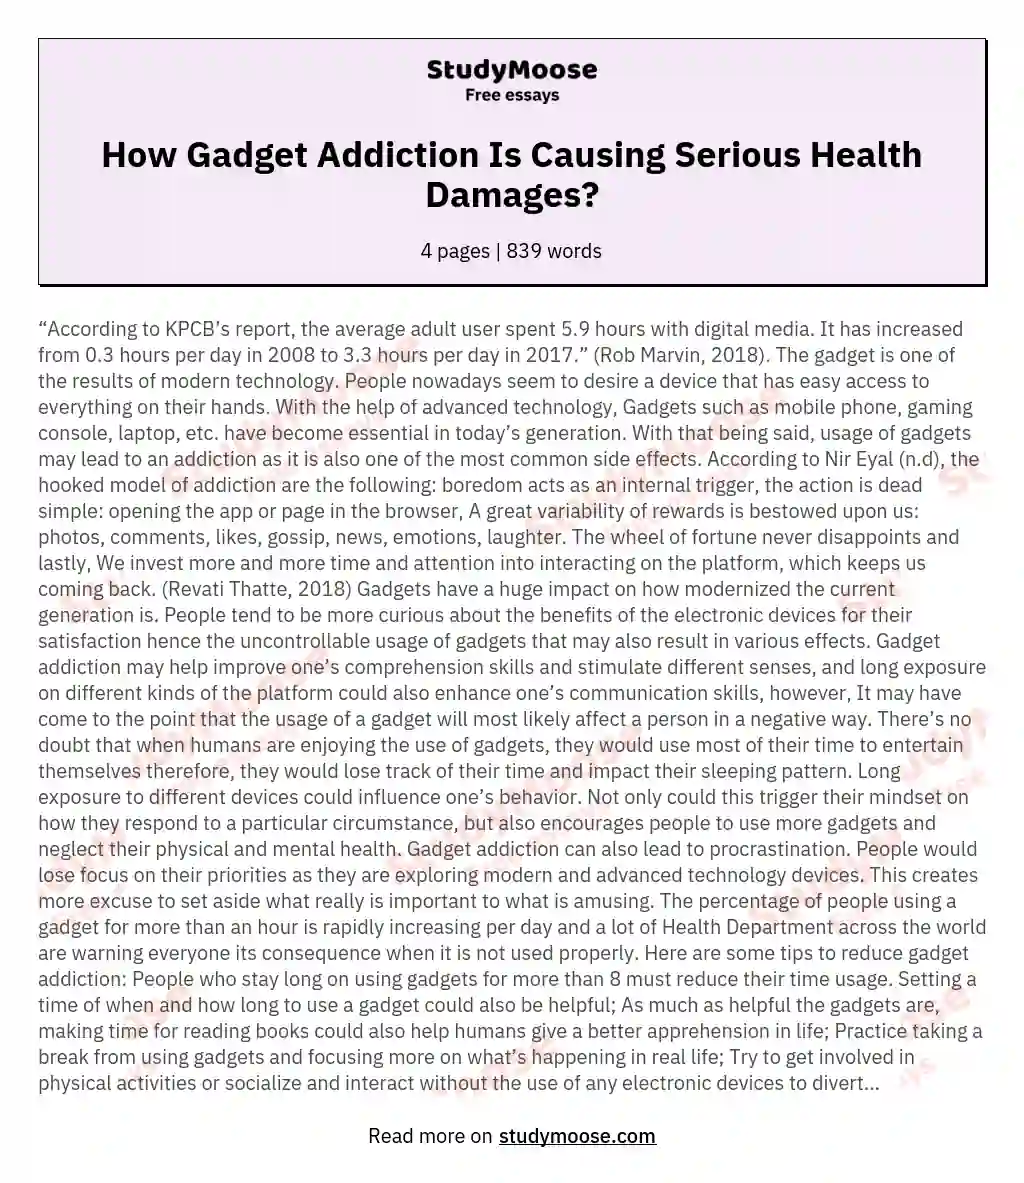 How Gadget Addiction Is Causing Serious Health Damages?